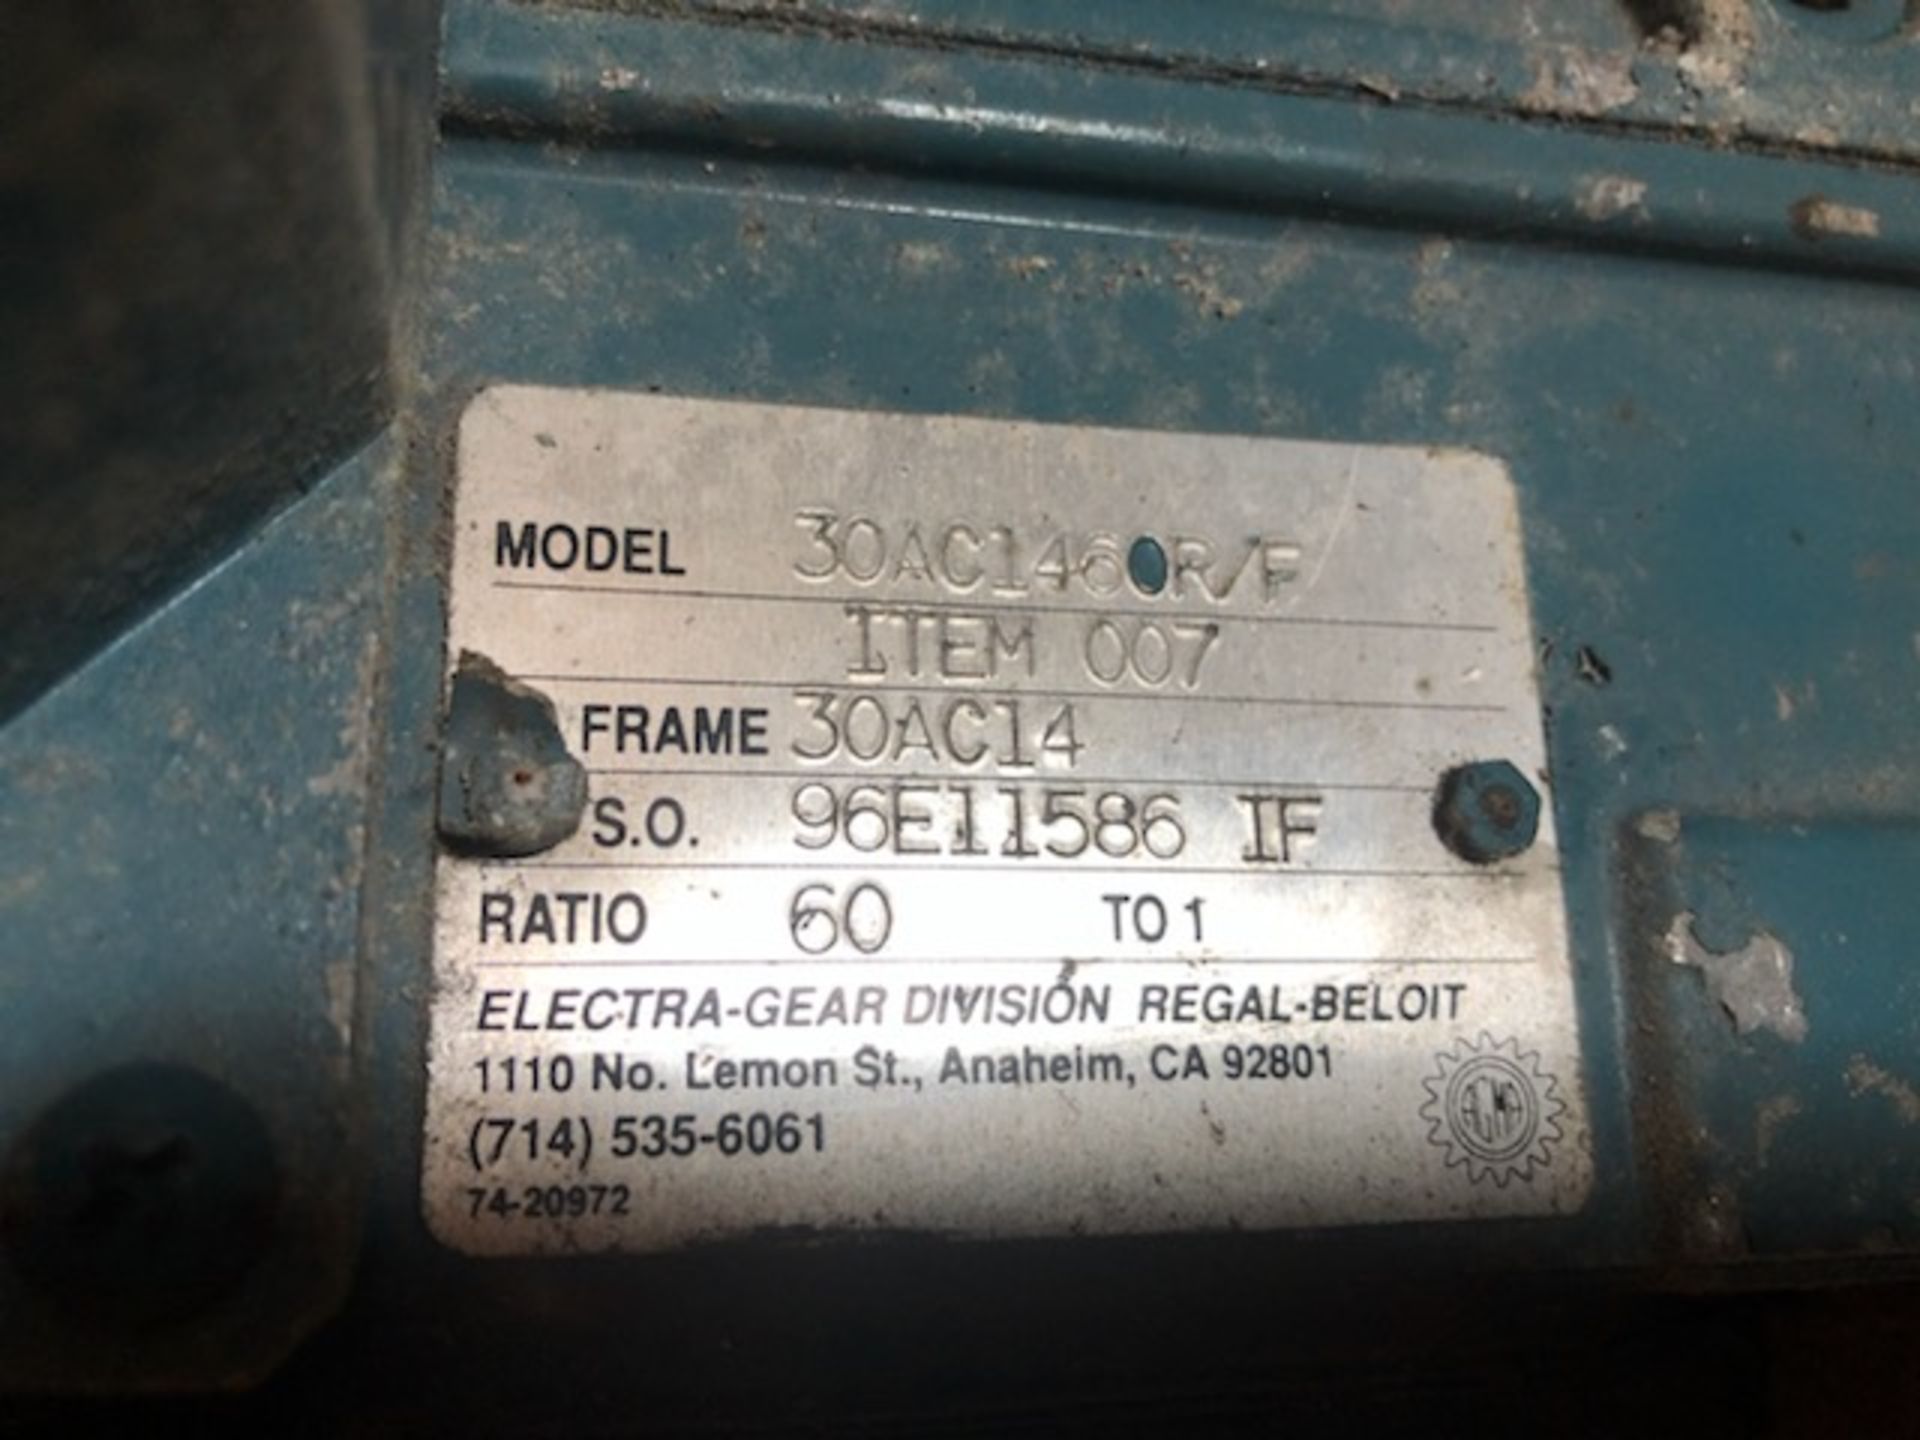 1HP 180V LEESON MOTOR ON GEAR BOX, RATIO 60 TO 1 - Image 2 of 3